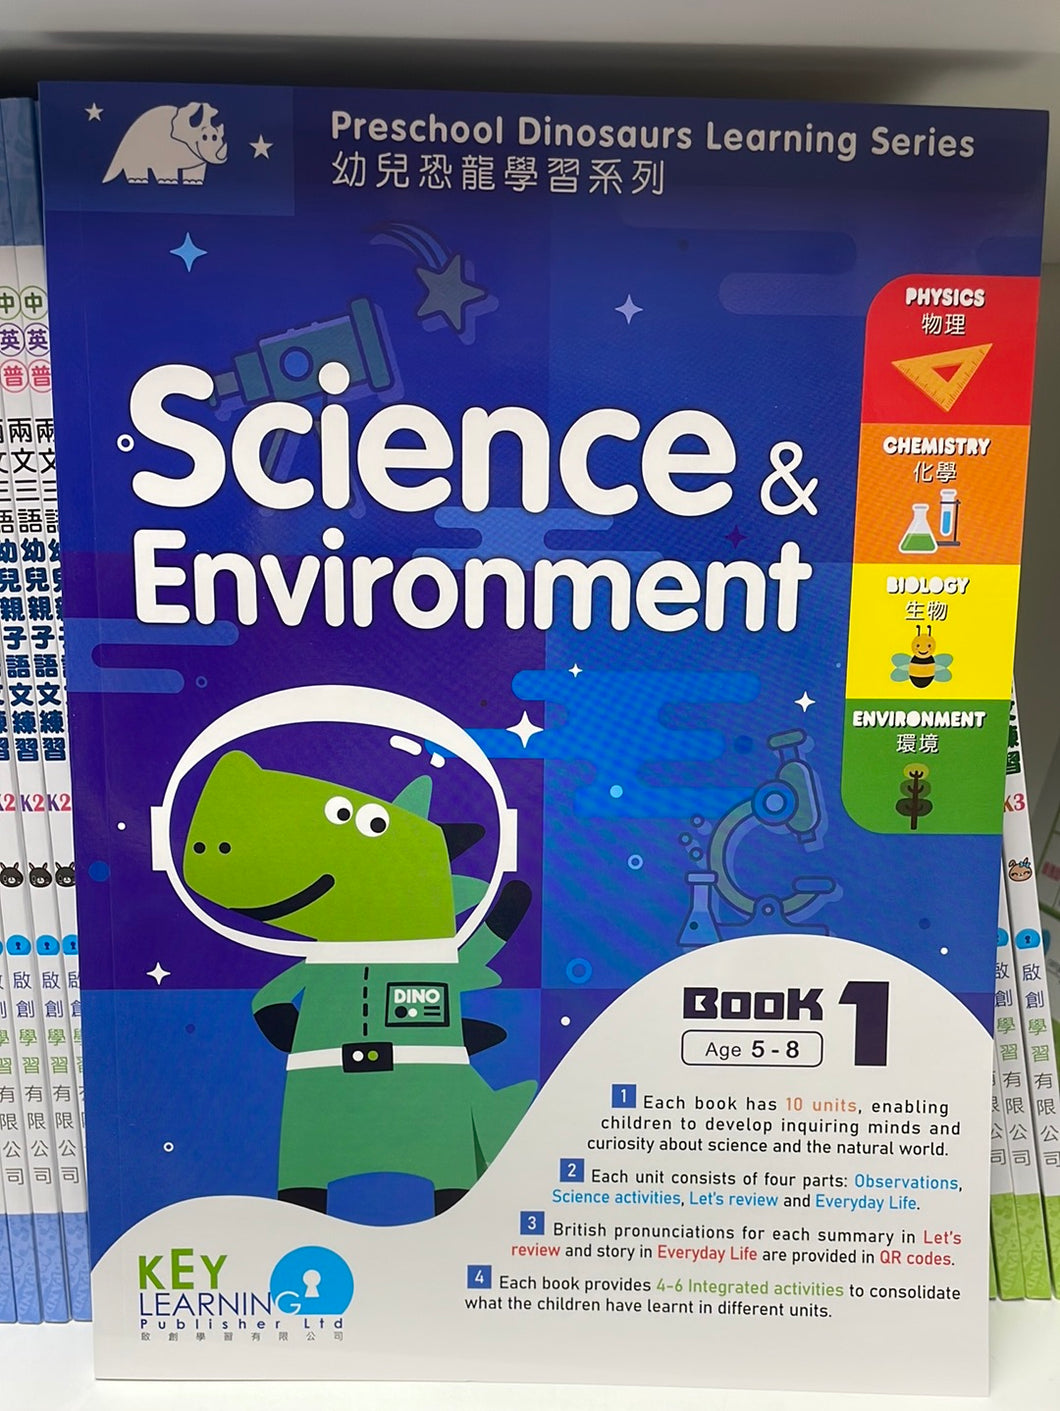 KL Science & Environment Book 1